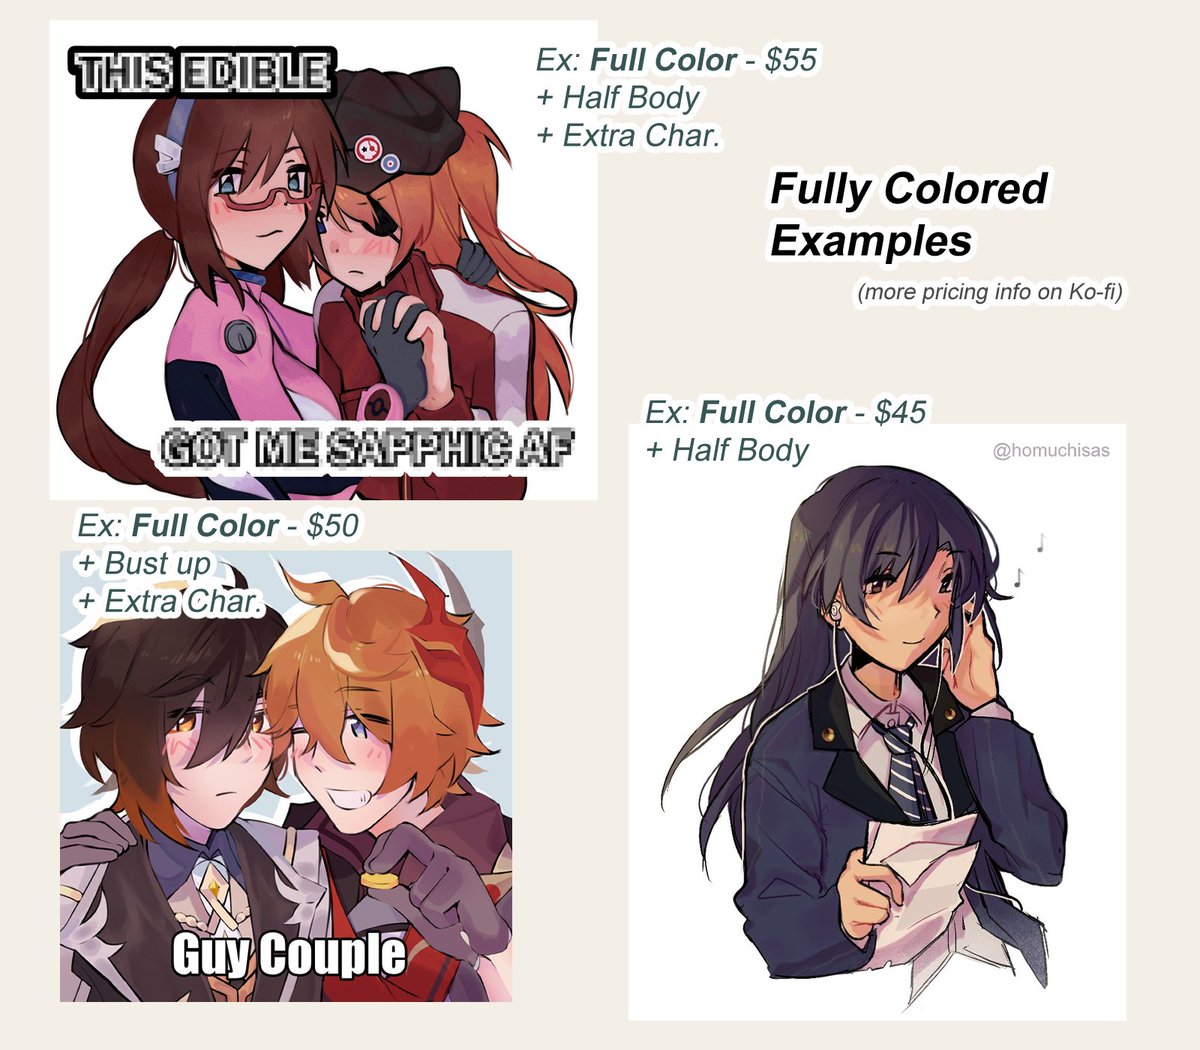 💢COMMISSIONS OPEN!💢

DM or commission through Ko-fi!
(5 SLOTS) 

DM commissions are paypal only!
Ko-fi: https://t.co/y5wu86mn01

LIKES + RTS APPRECIATED! 